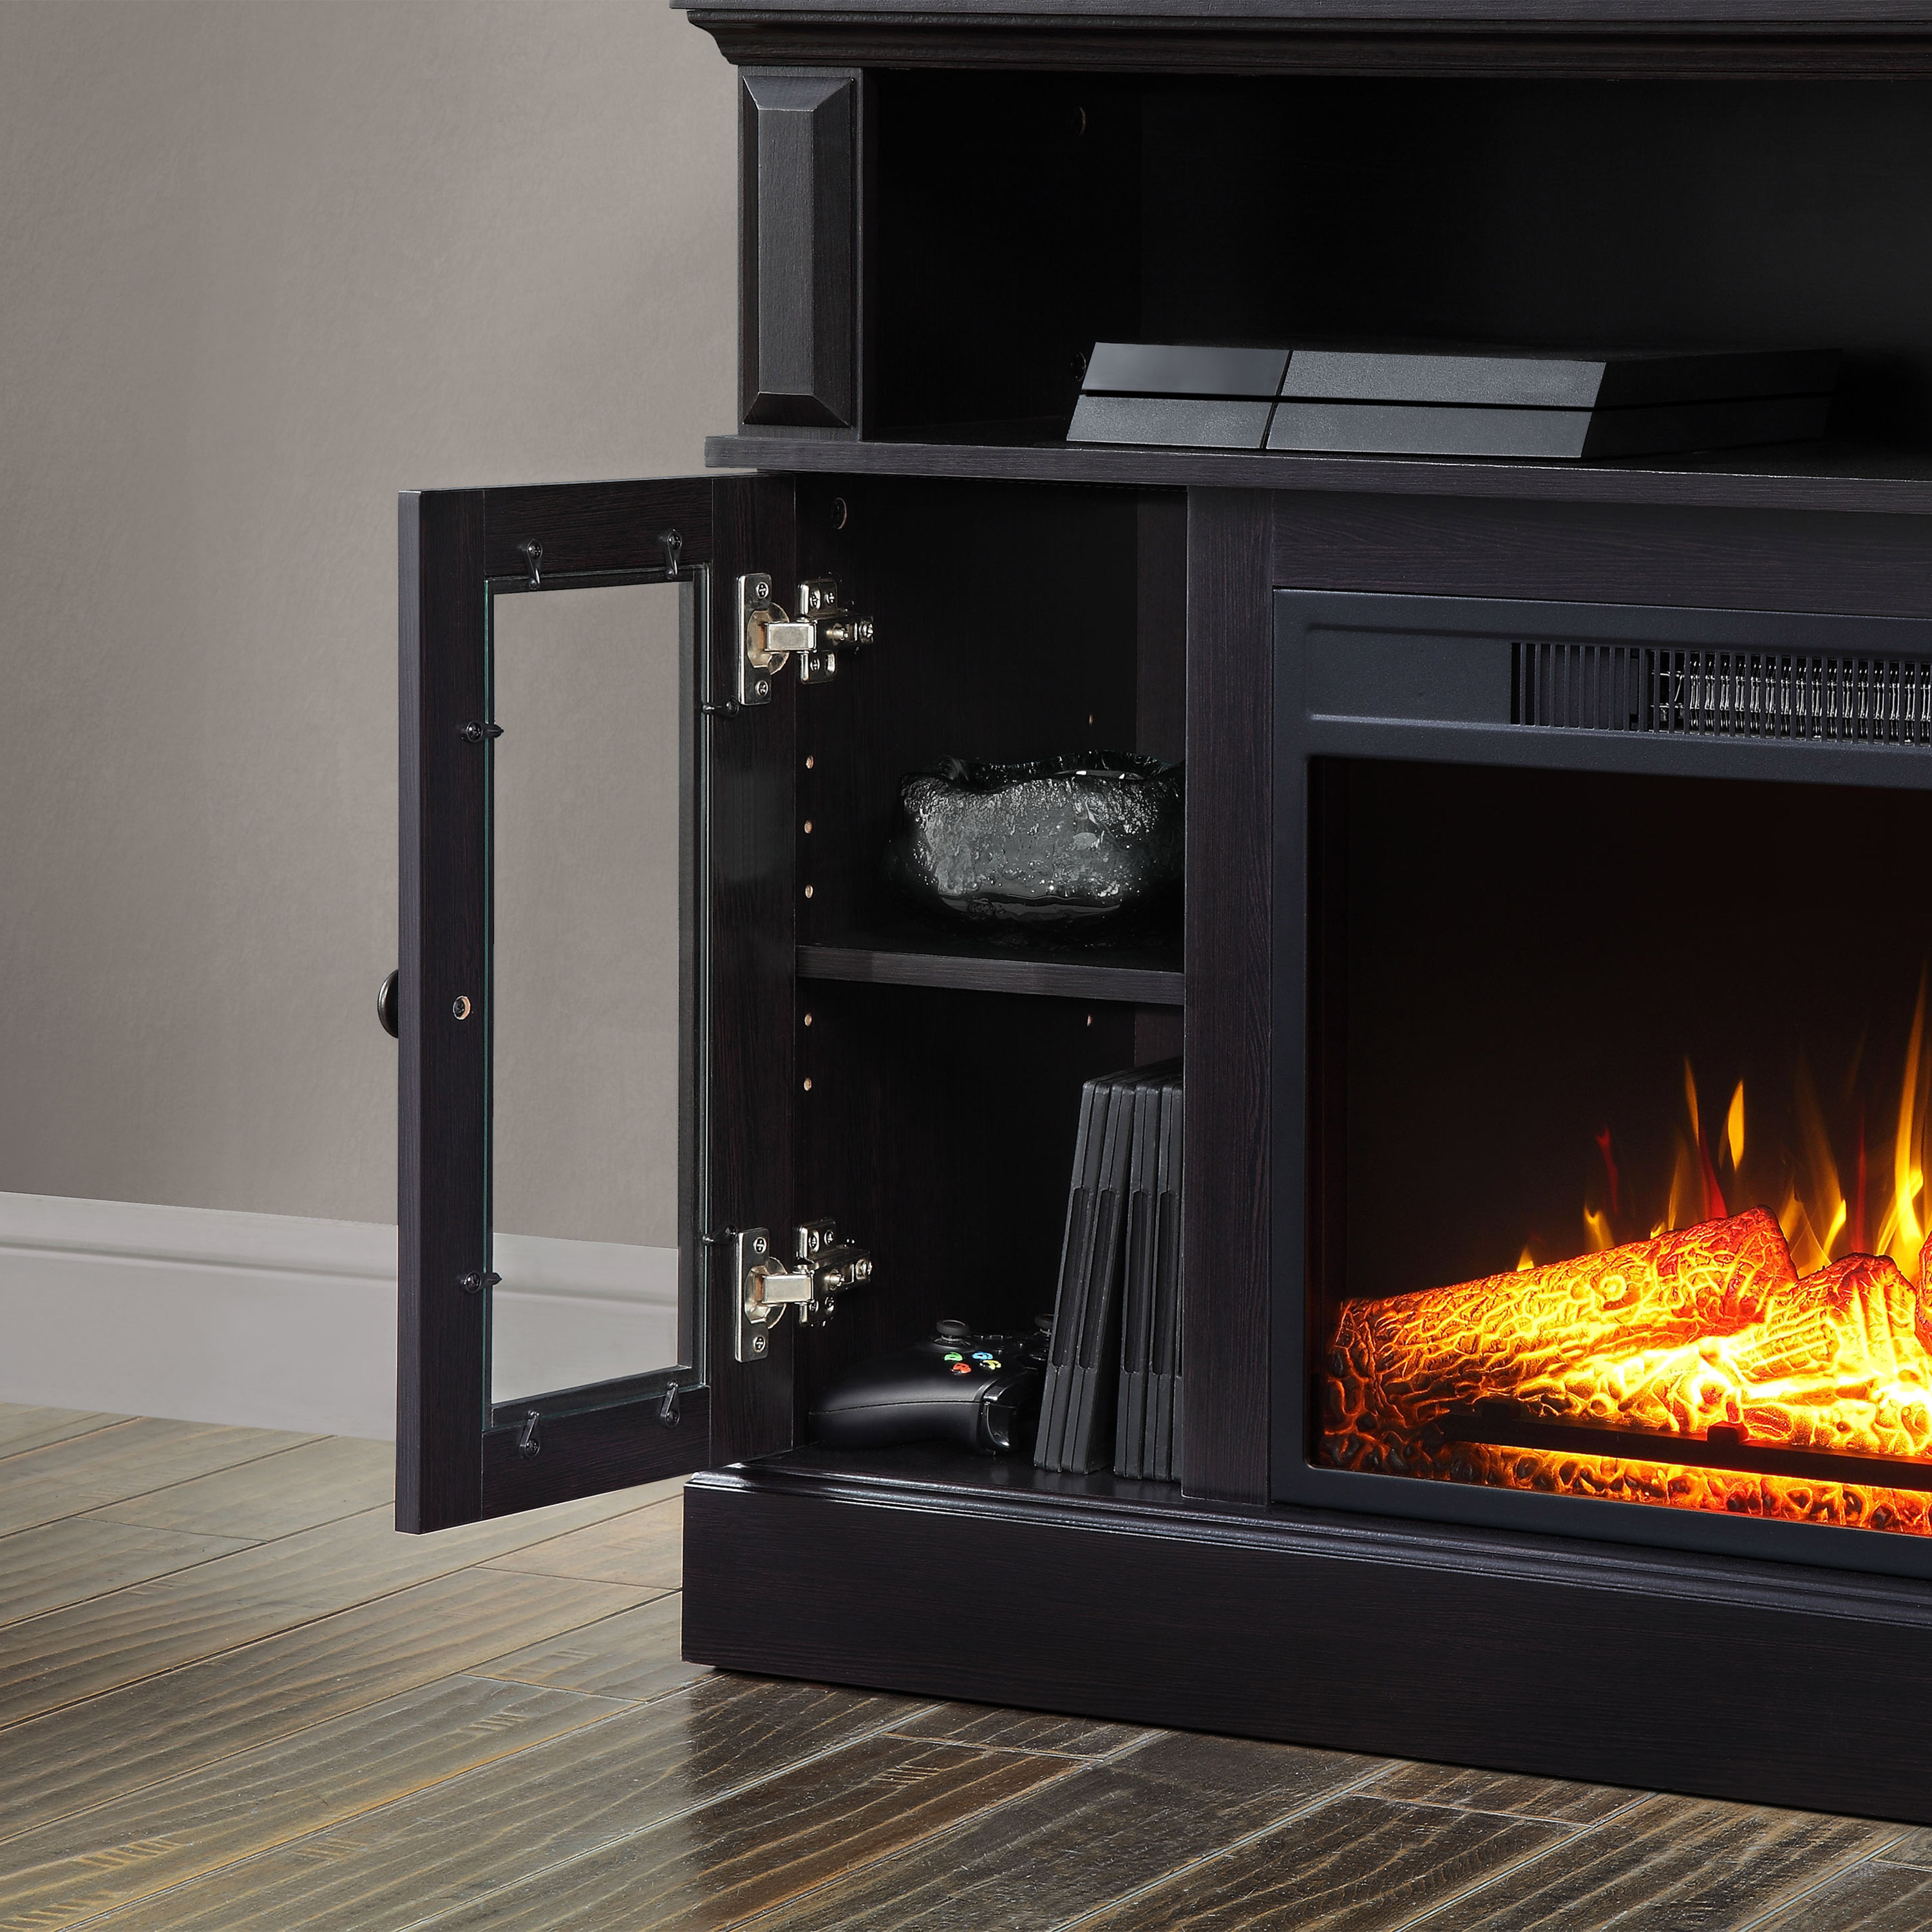 Whalen Barston Media Fireplace Console for TV's up to 55”, Espresso Finish - image 7 of 11